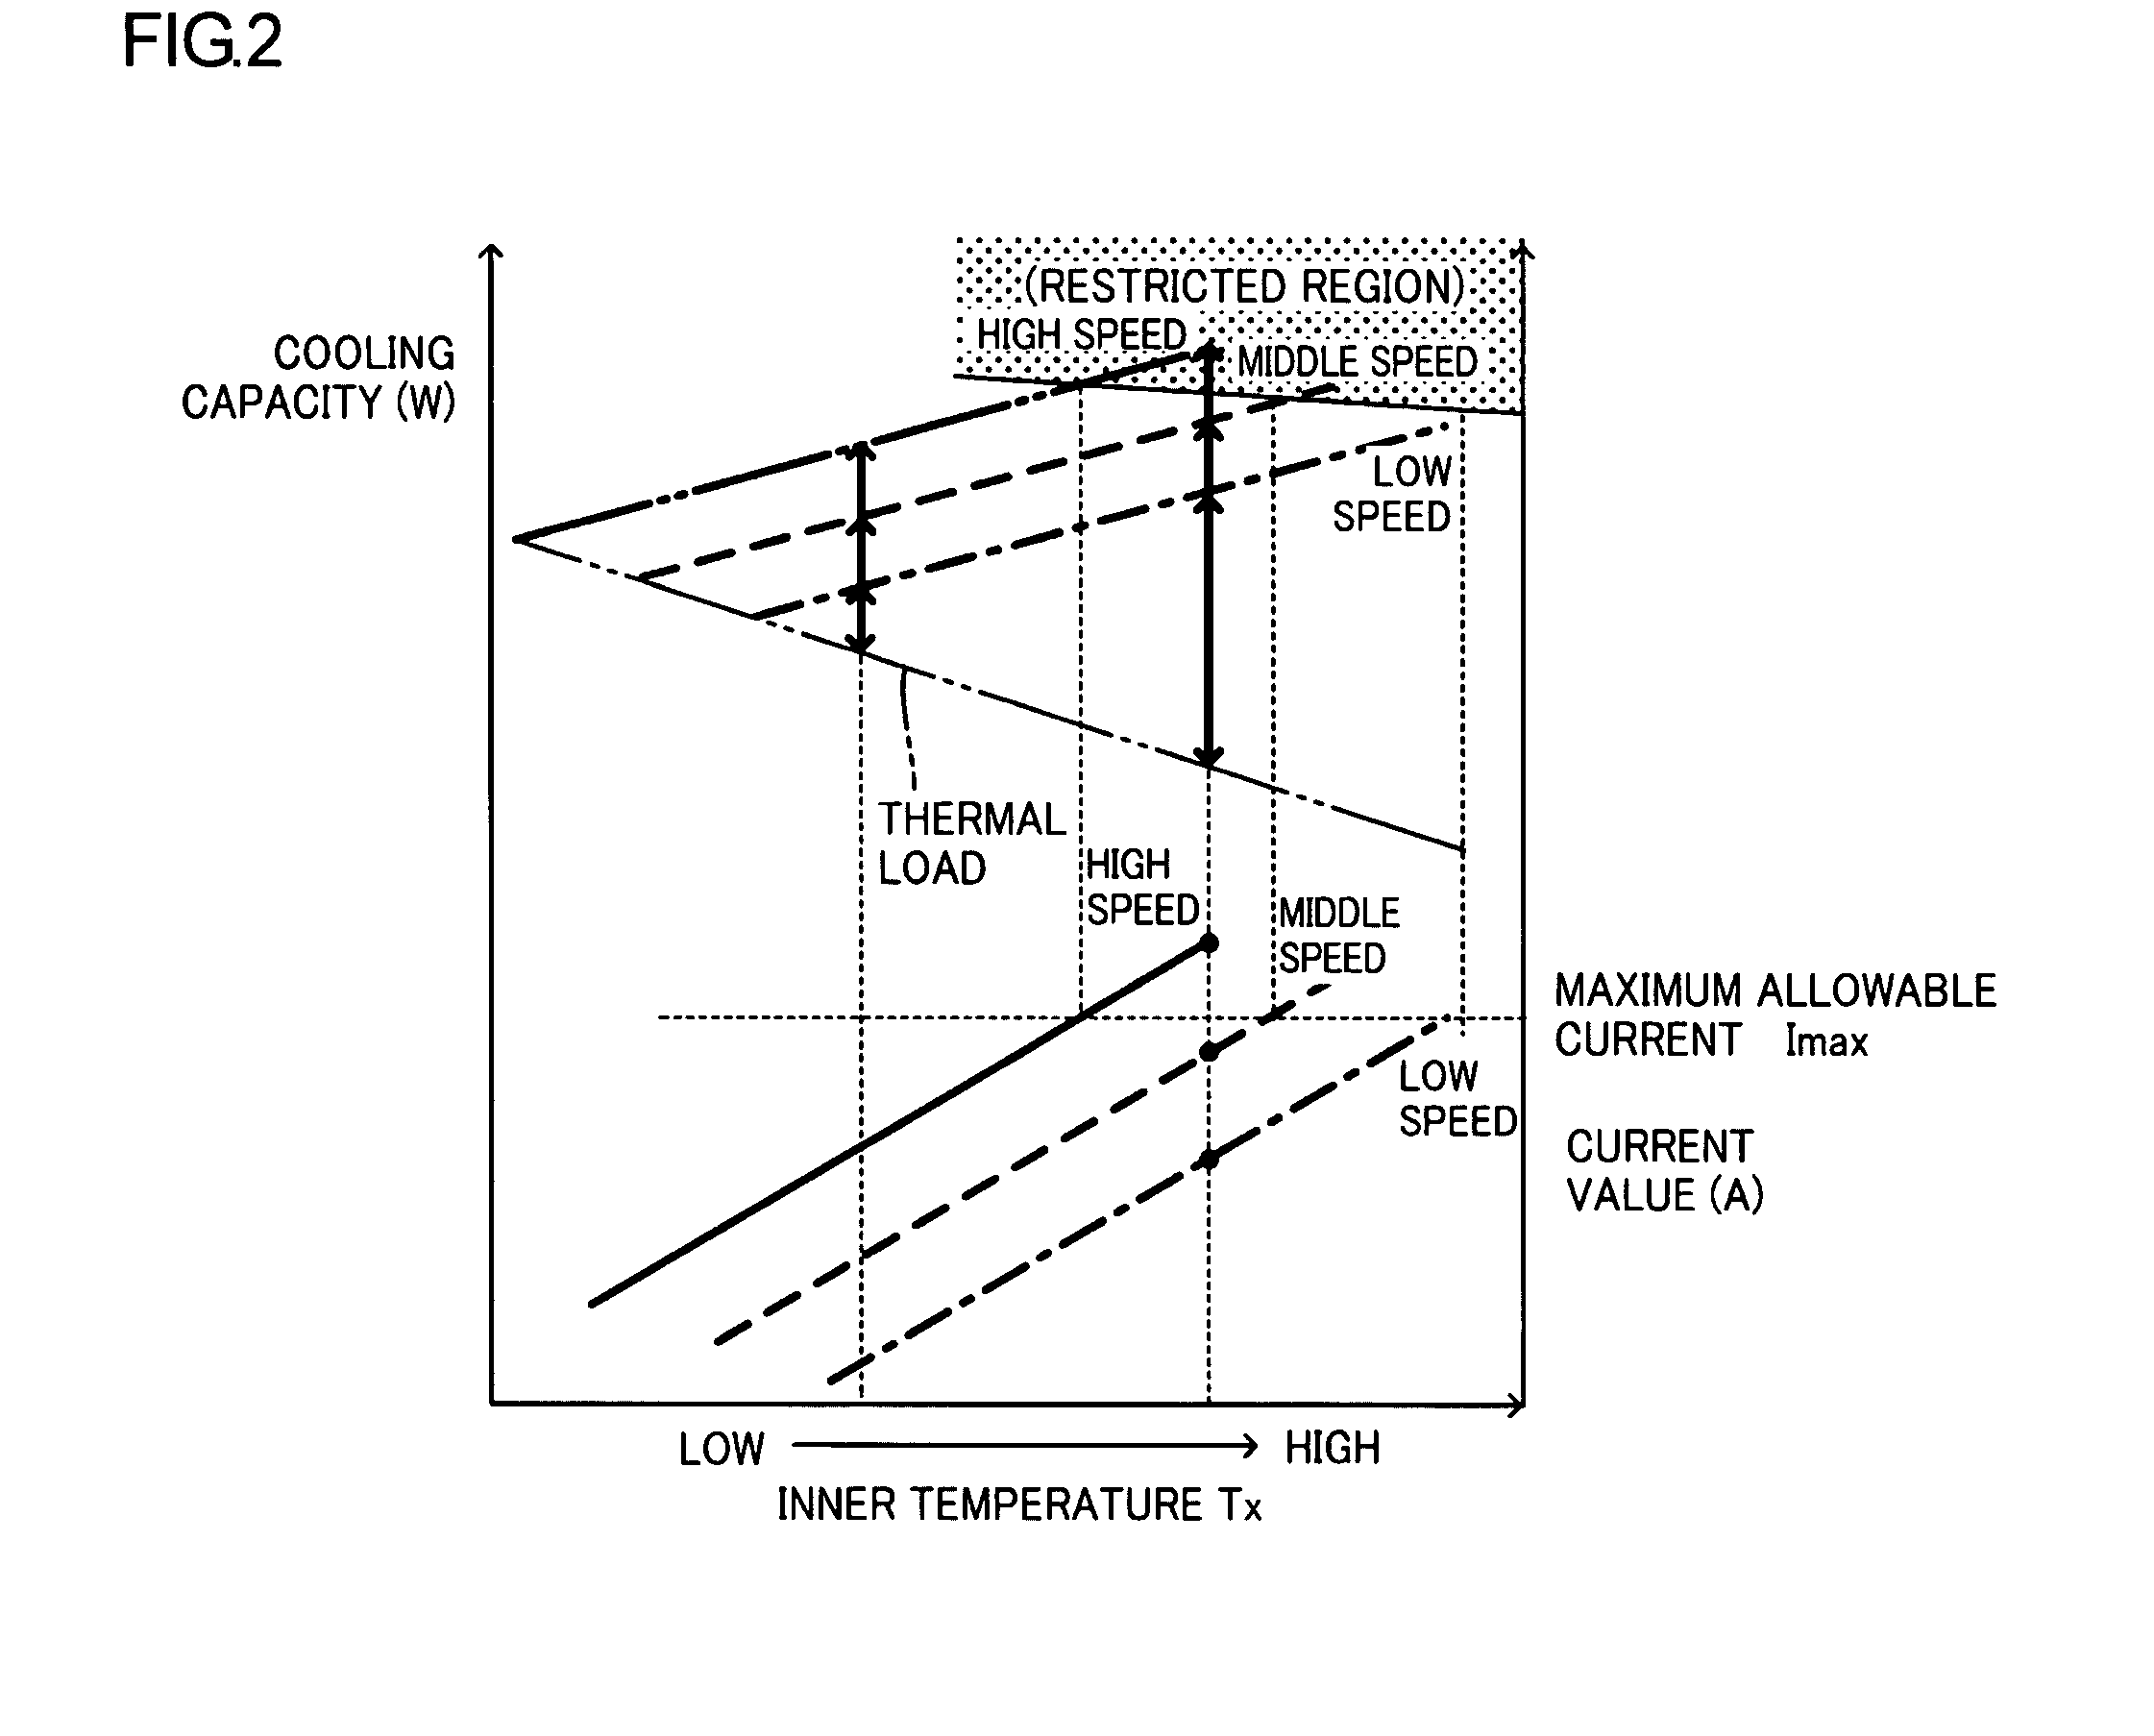 Cooling apparatus having a variable speed compressor with speed limited on the basis of a sensed performance parameter